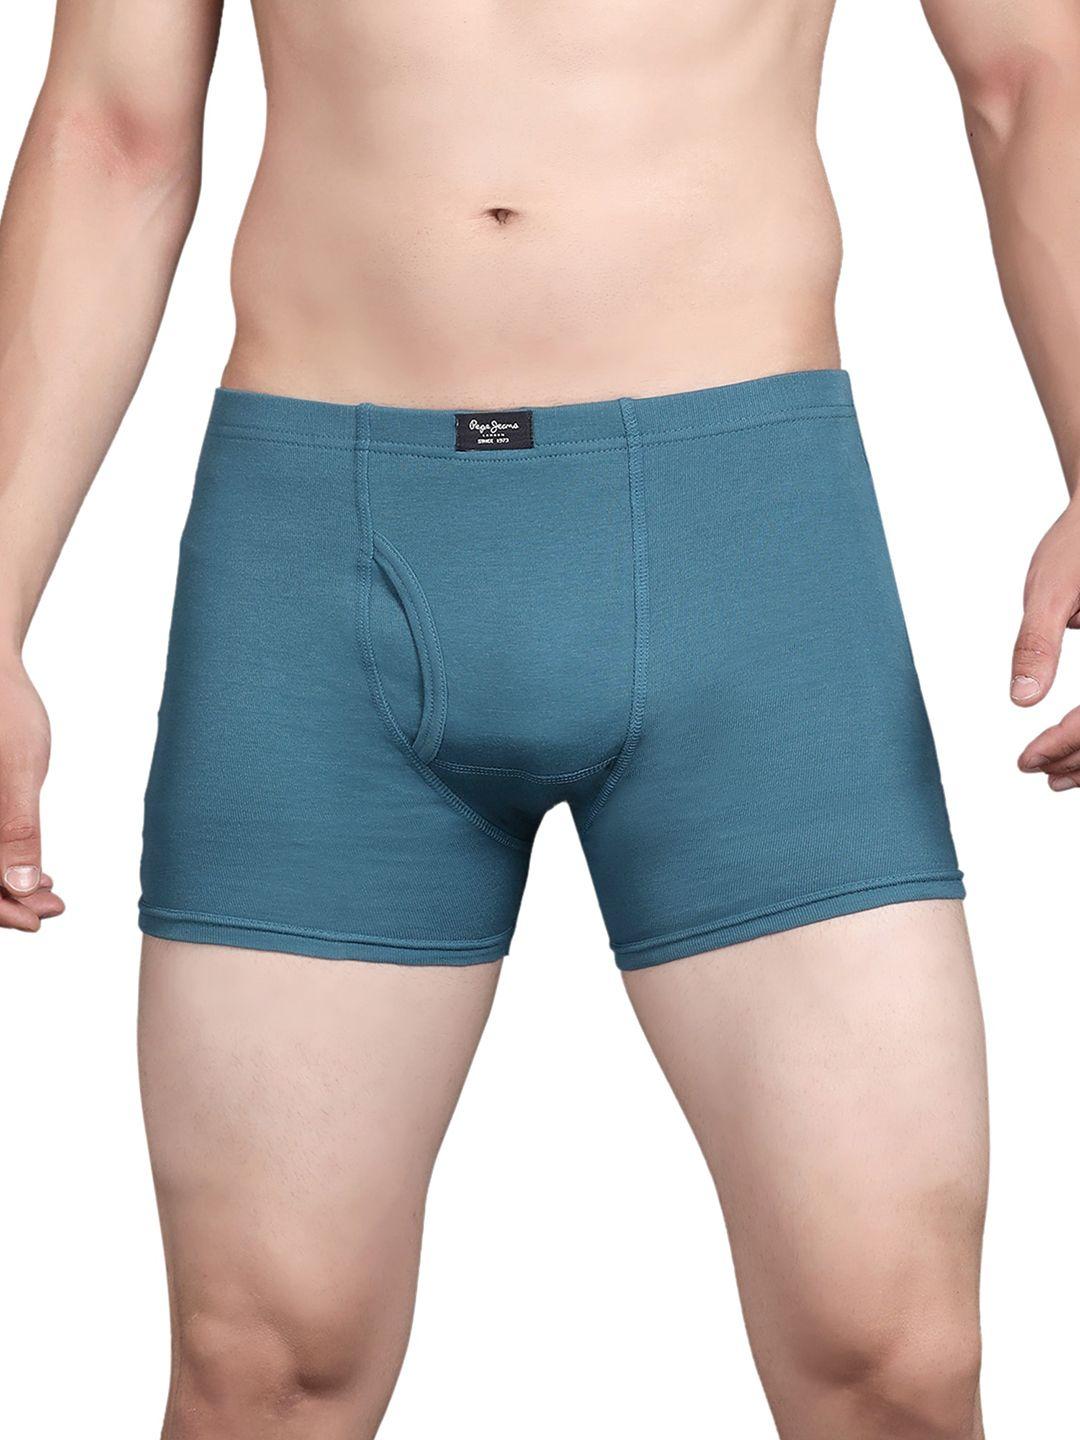 pepe-jeans-men-pack-of-2-teal-blue-solid-cotton-trunk-clt01-02-corsair-s